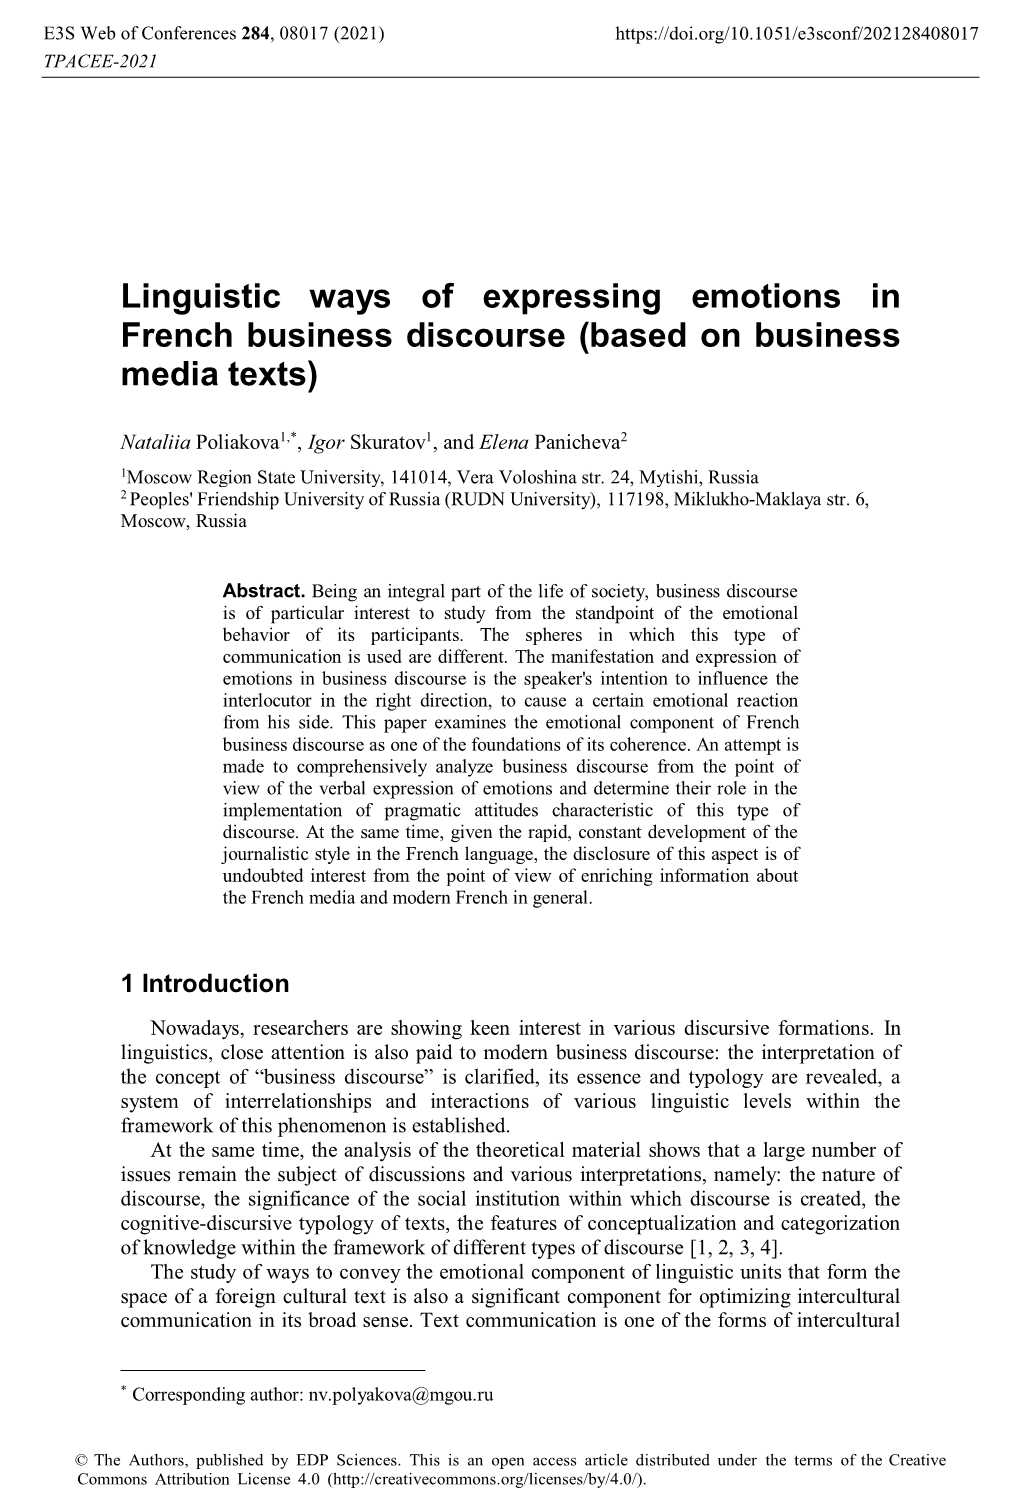 Linguistic Ways of Expressing Emotions in French Business Discourse (Based on Business Media Texts)